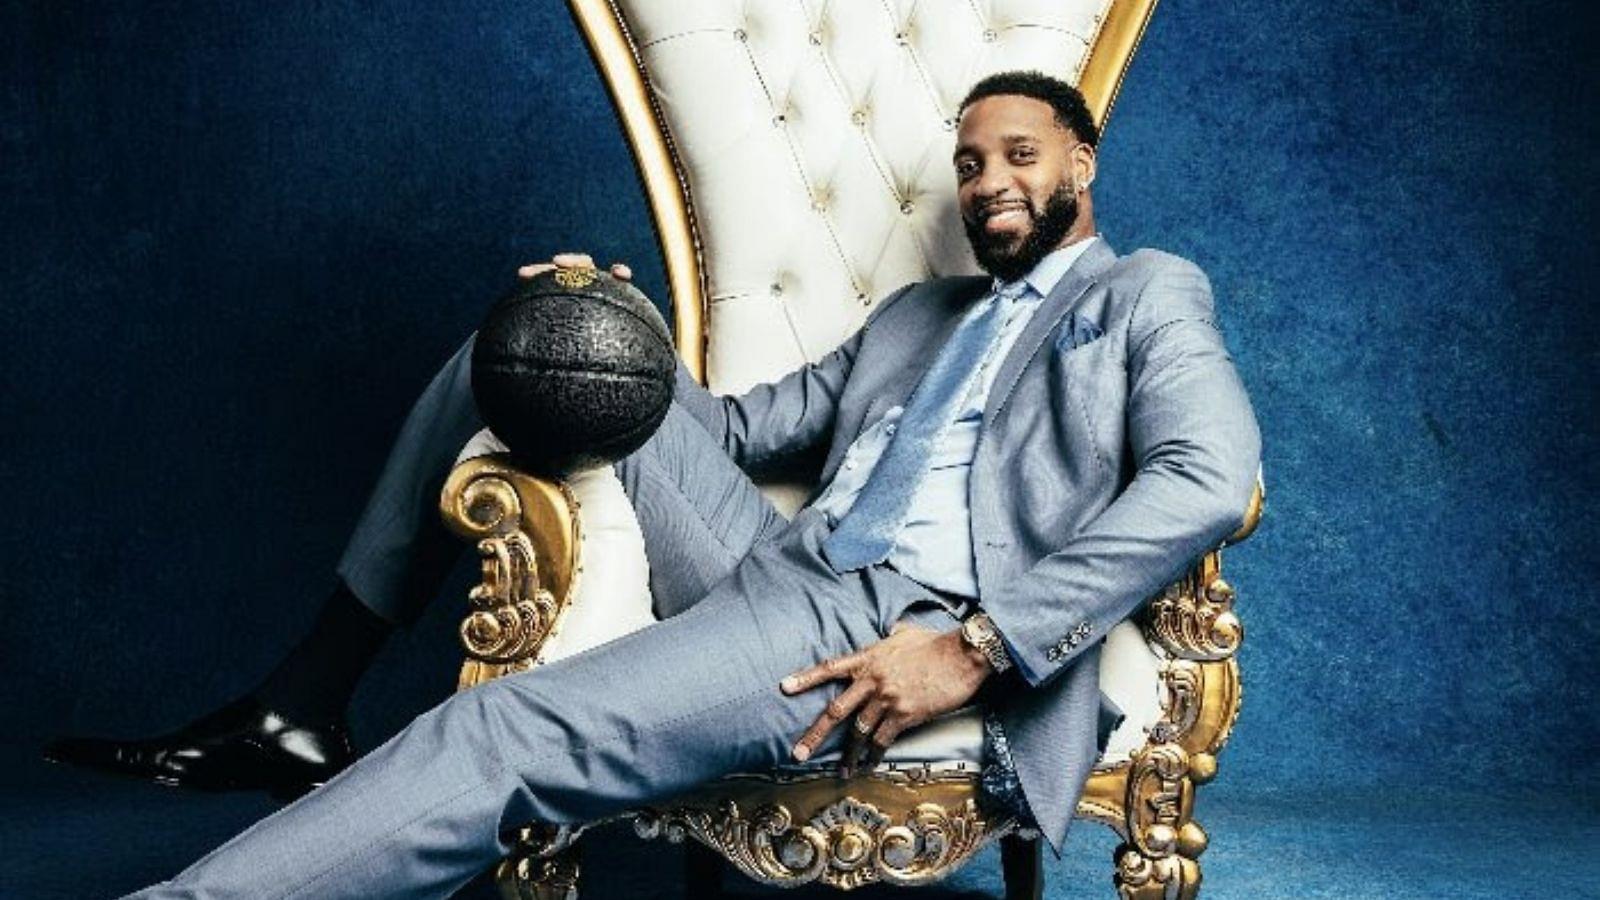 "Tracy McGrady has $570,000 in cash rewards for Ones Basketball League": Former Magic and Rockets superstar invests $10 million on his idea for 1vs1 basketball league